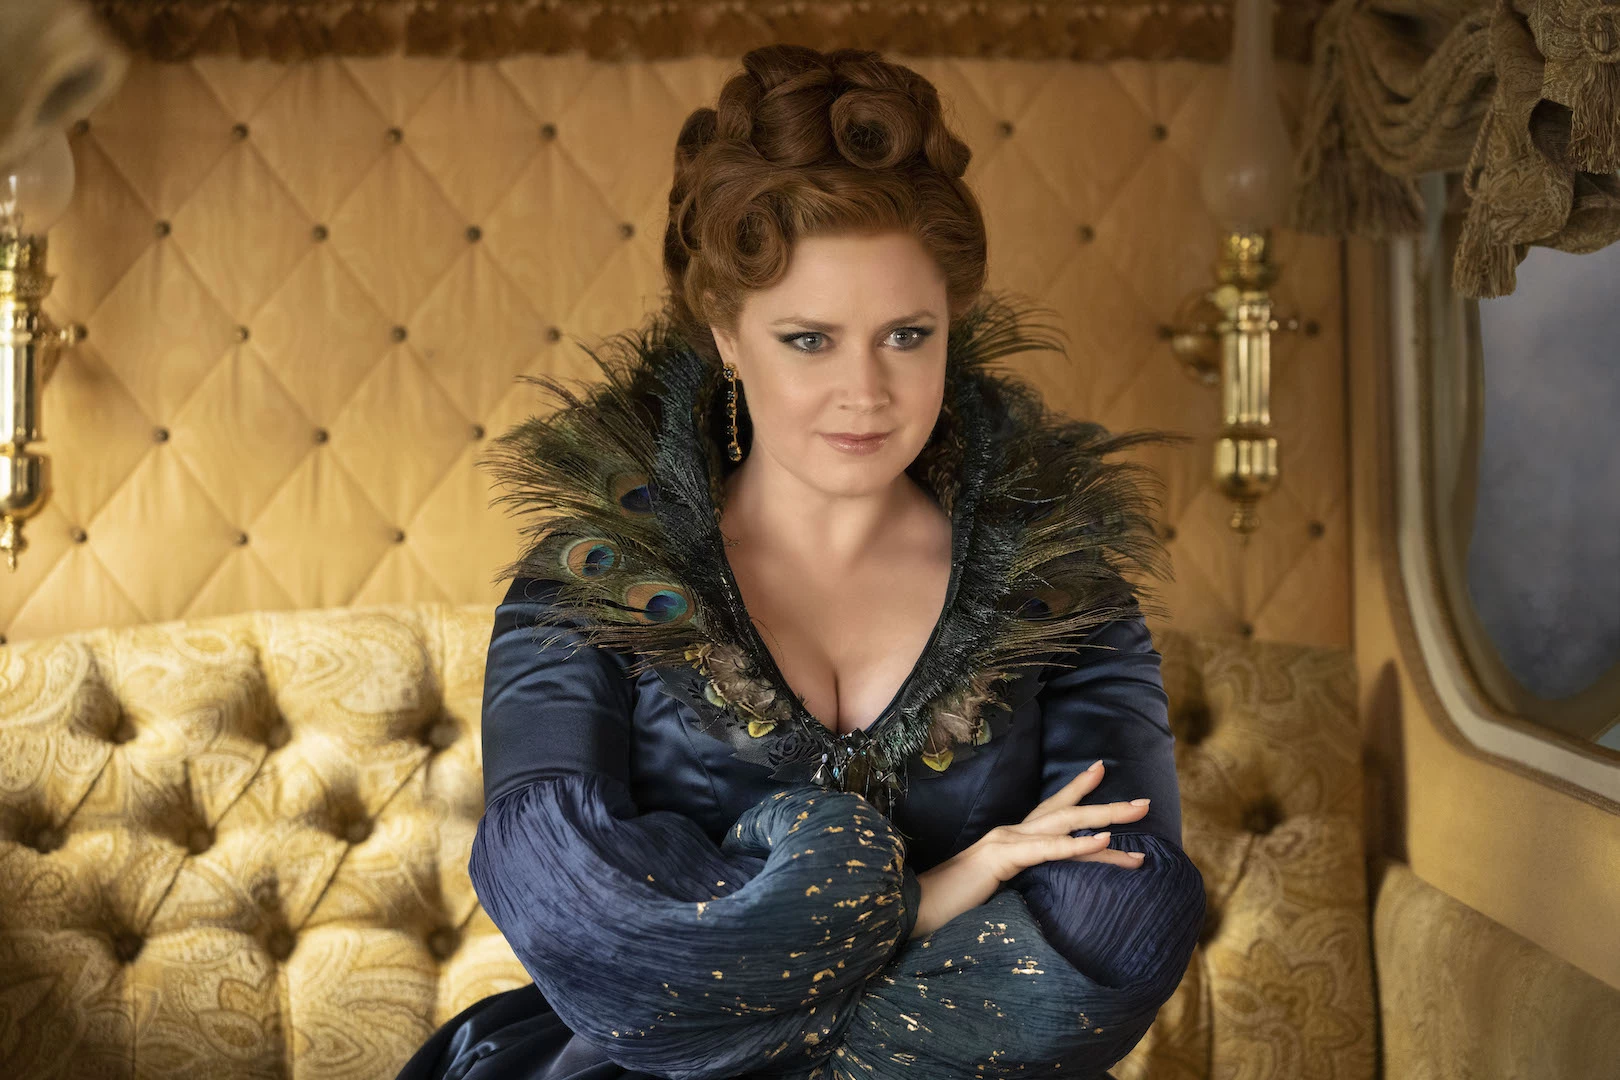 Trend to Try Tuesday: Deep-V Gems to Channel Amy Adams' Character in  American Hustle